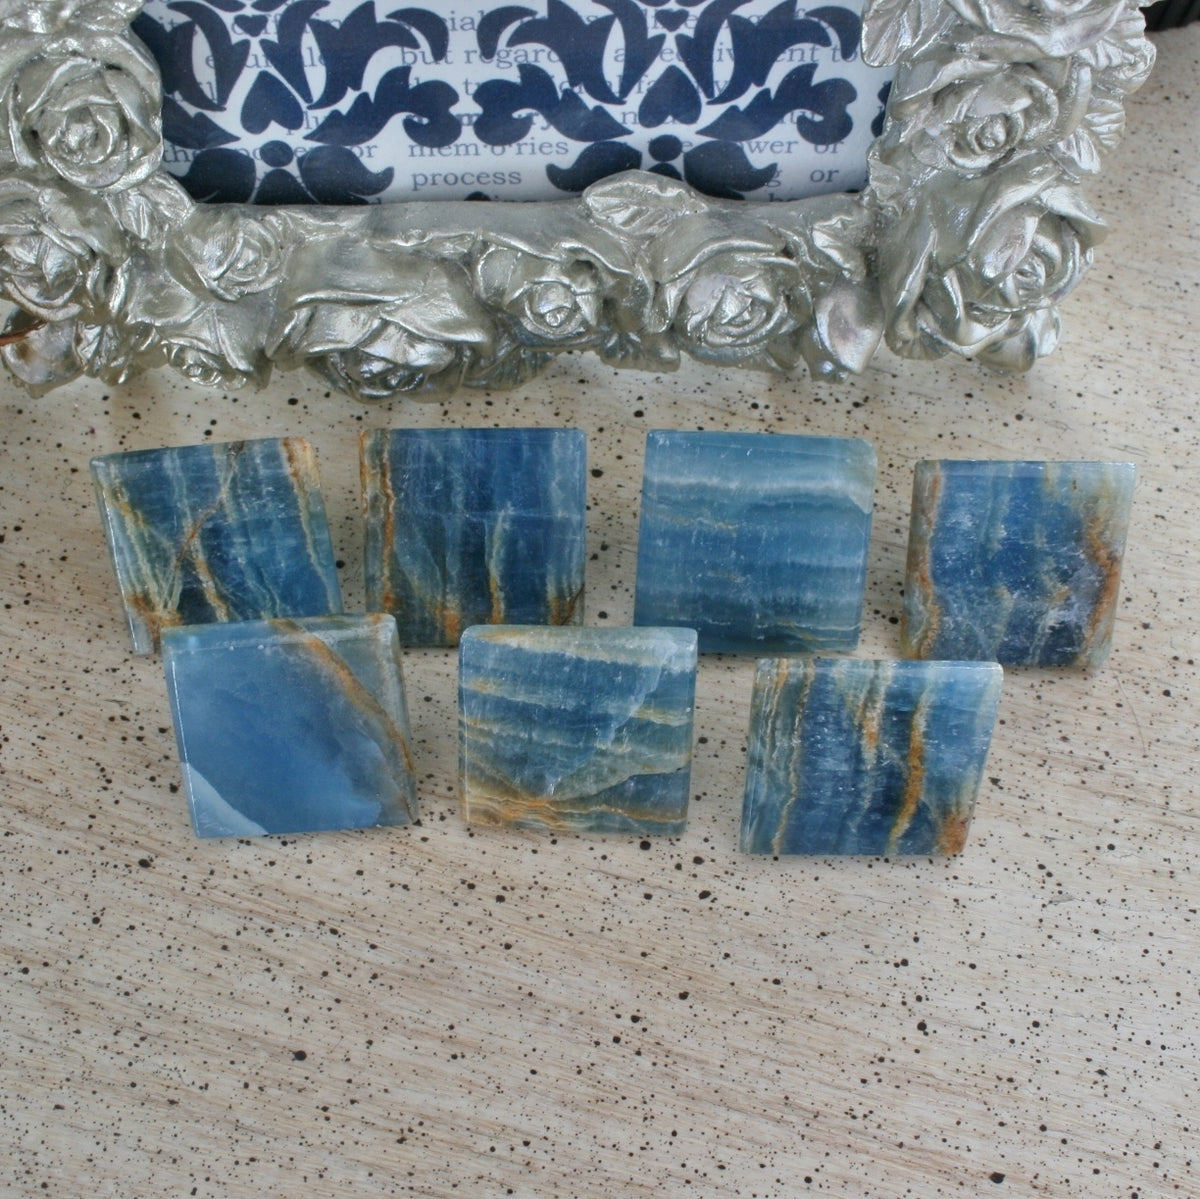 Blue Calcite / Blue Onyx Pyramid with Banding from Argentina, also called Lemurian Aquatine Calcite, LGPY4